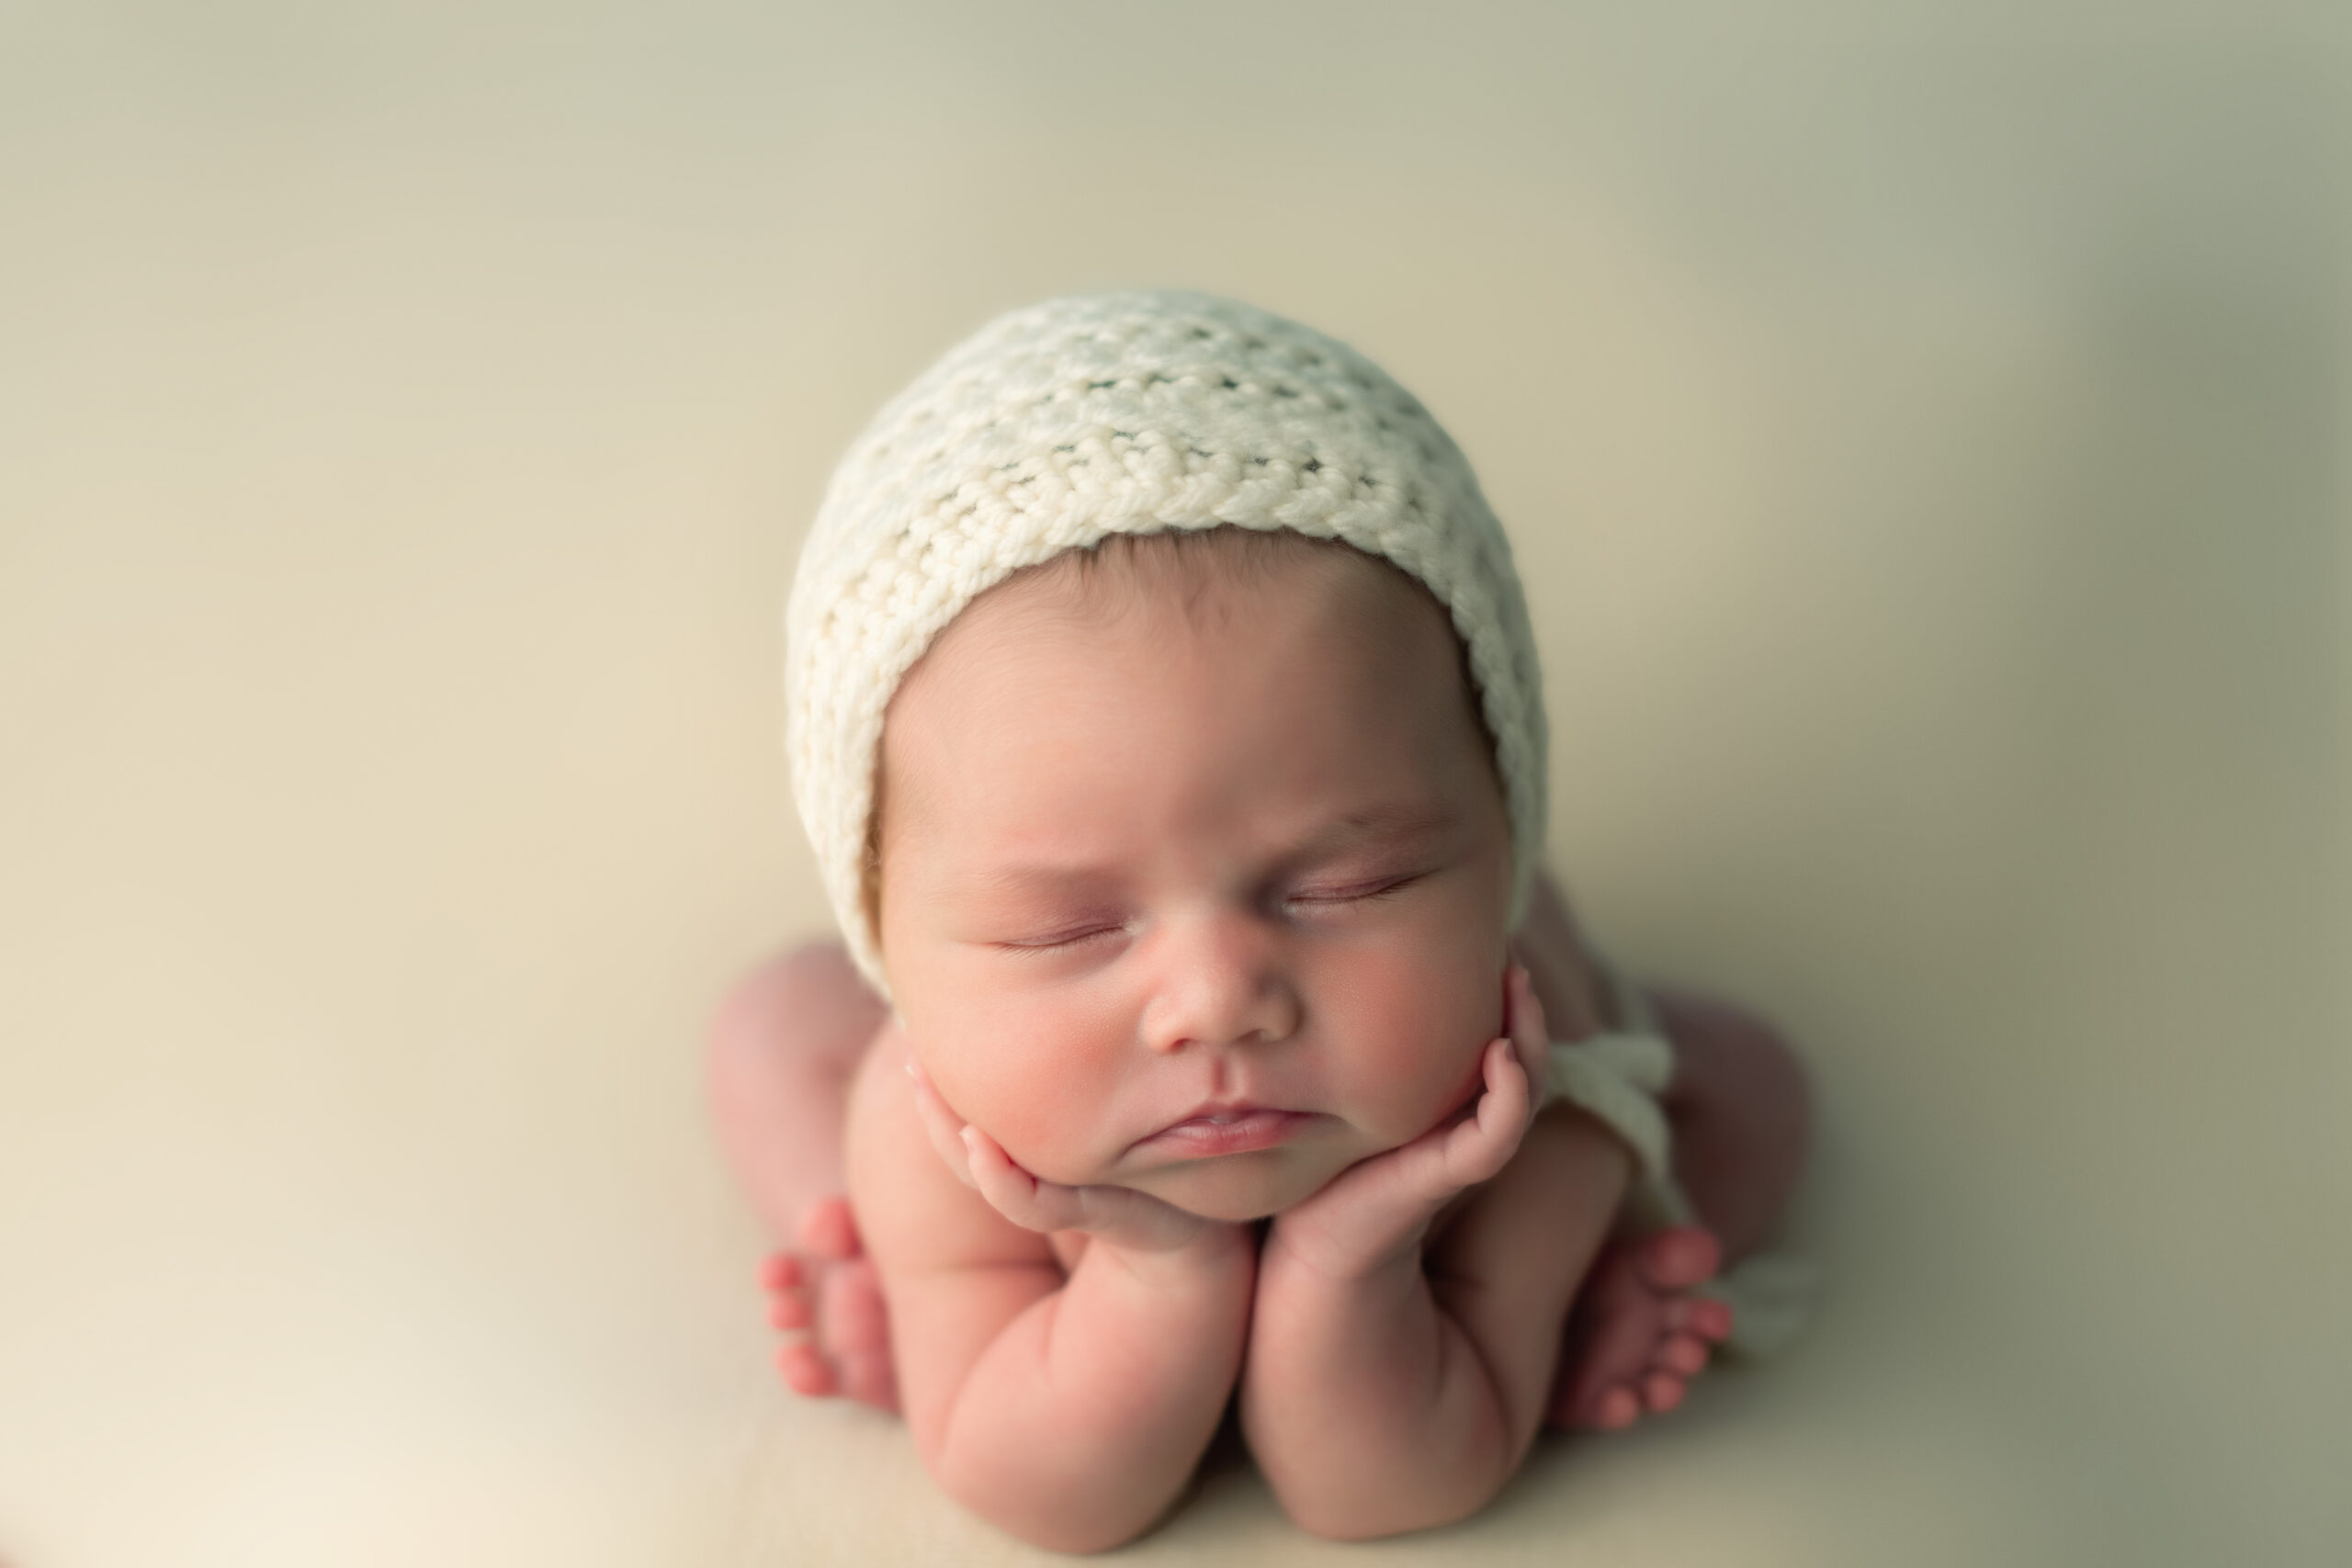 baby girl on white backdrop with white lace bonnet and in froggie pose